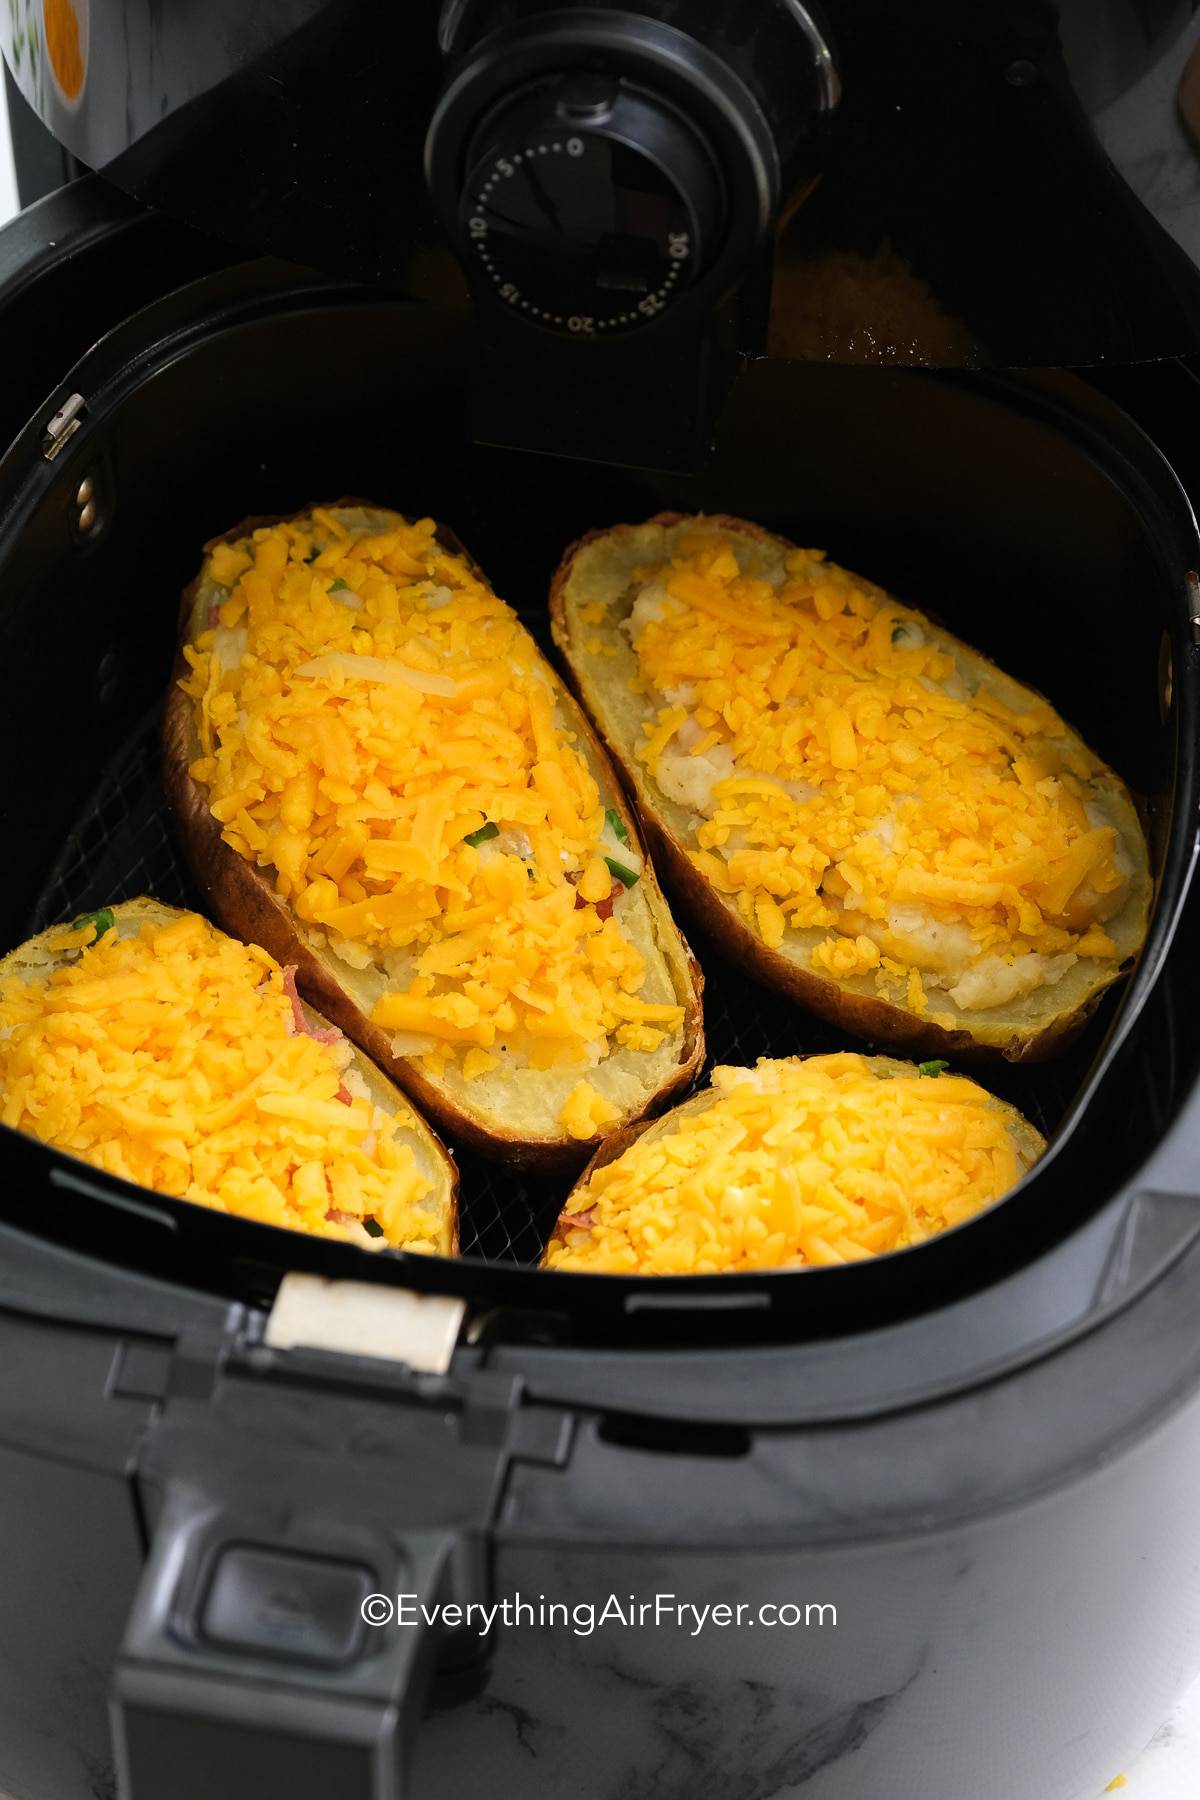 Uncooked Twice Baked Potatoes in Air Fryer